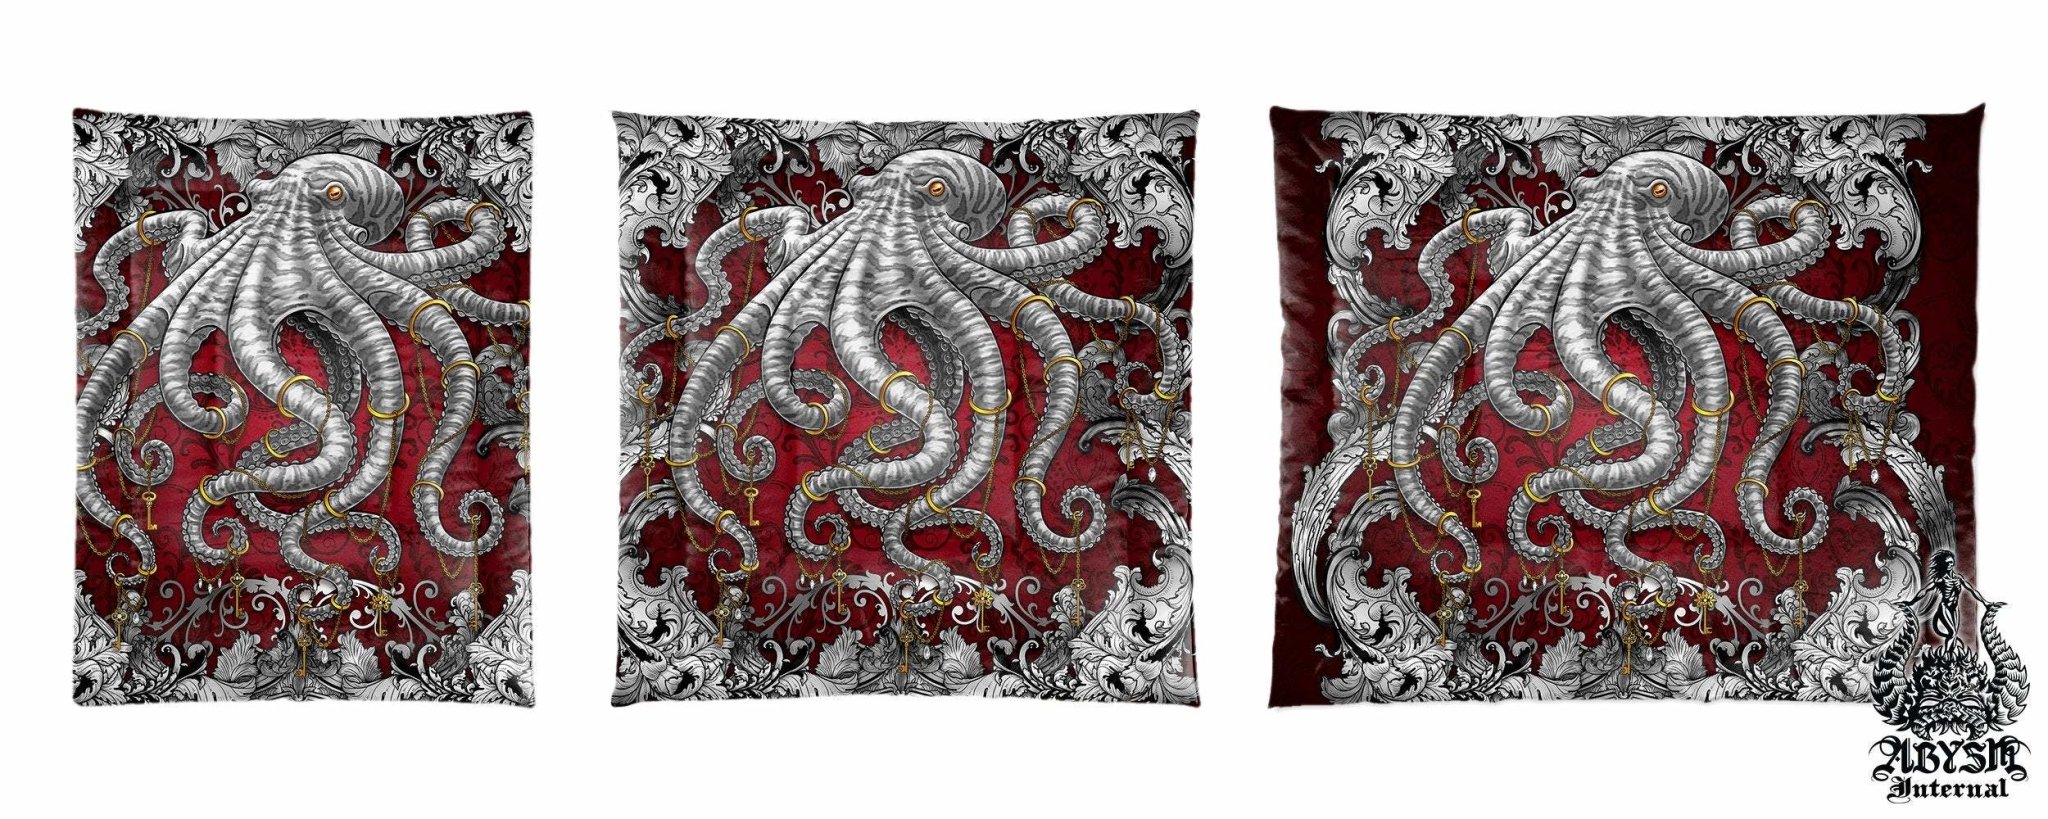 Octopus Bedding Set, Comforter and Duvet, Alternative Bed Cover, Coastal Bedroom Decor, King, Queen and Twin Size - Silver and Red - Abysm Internal